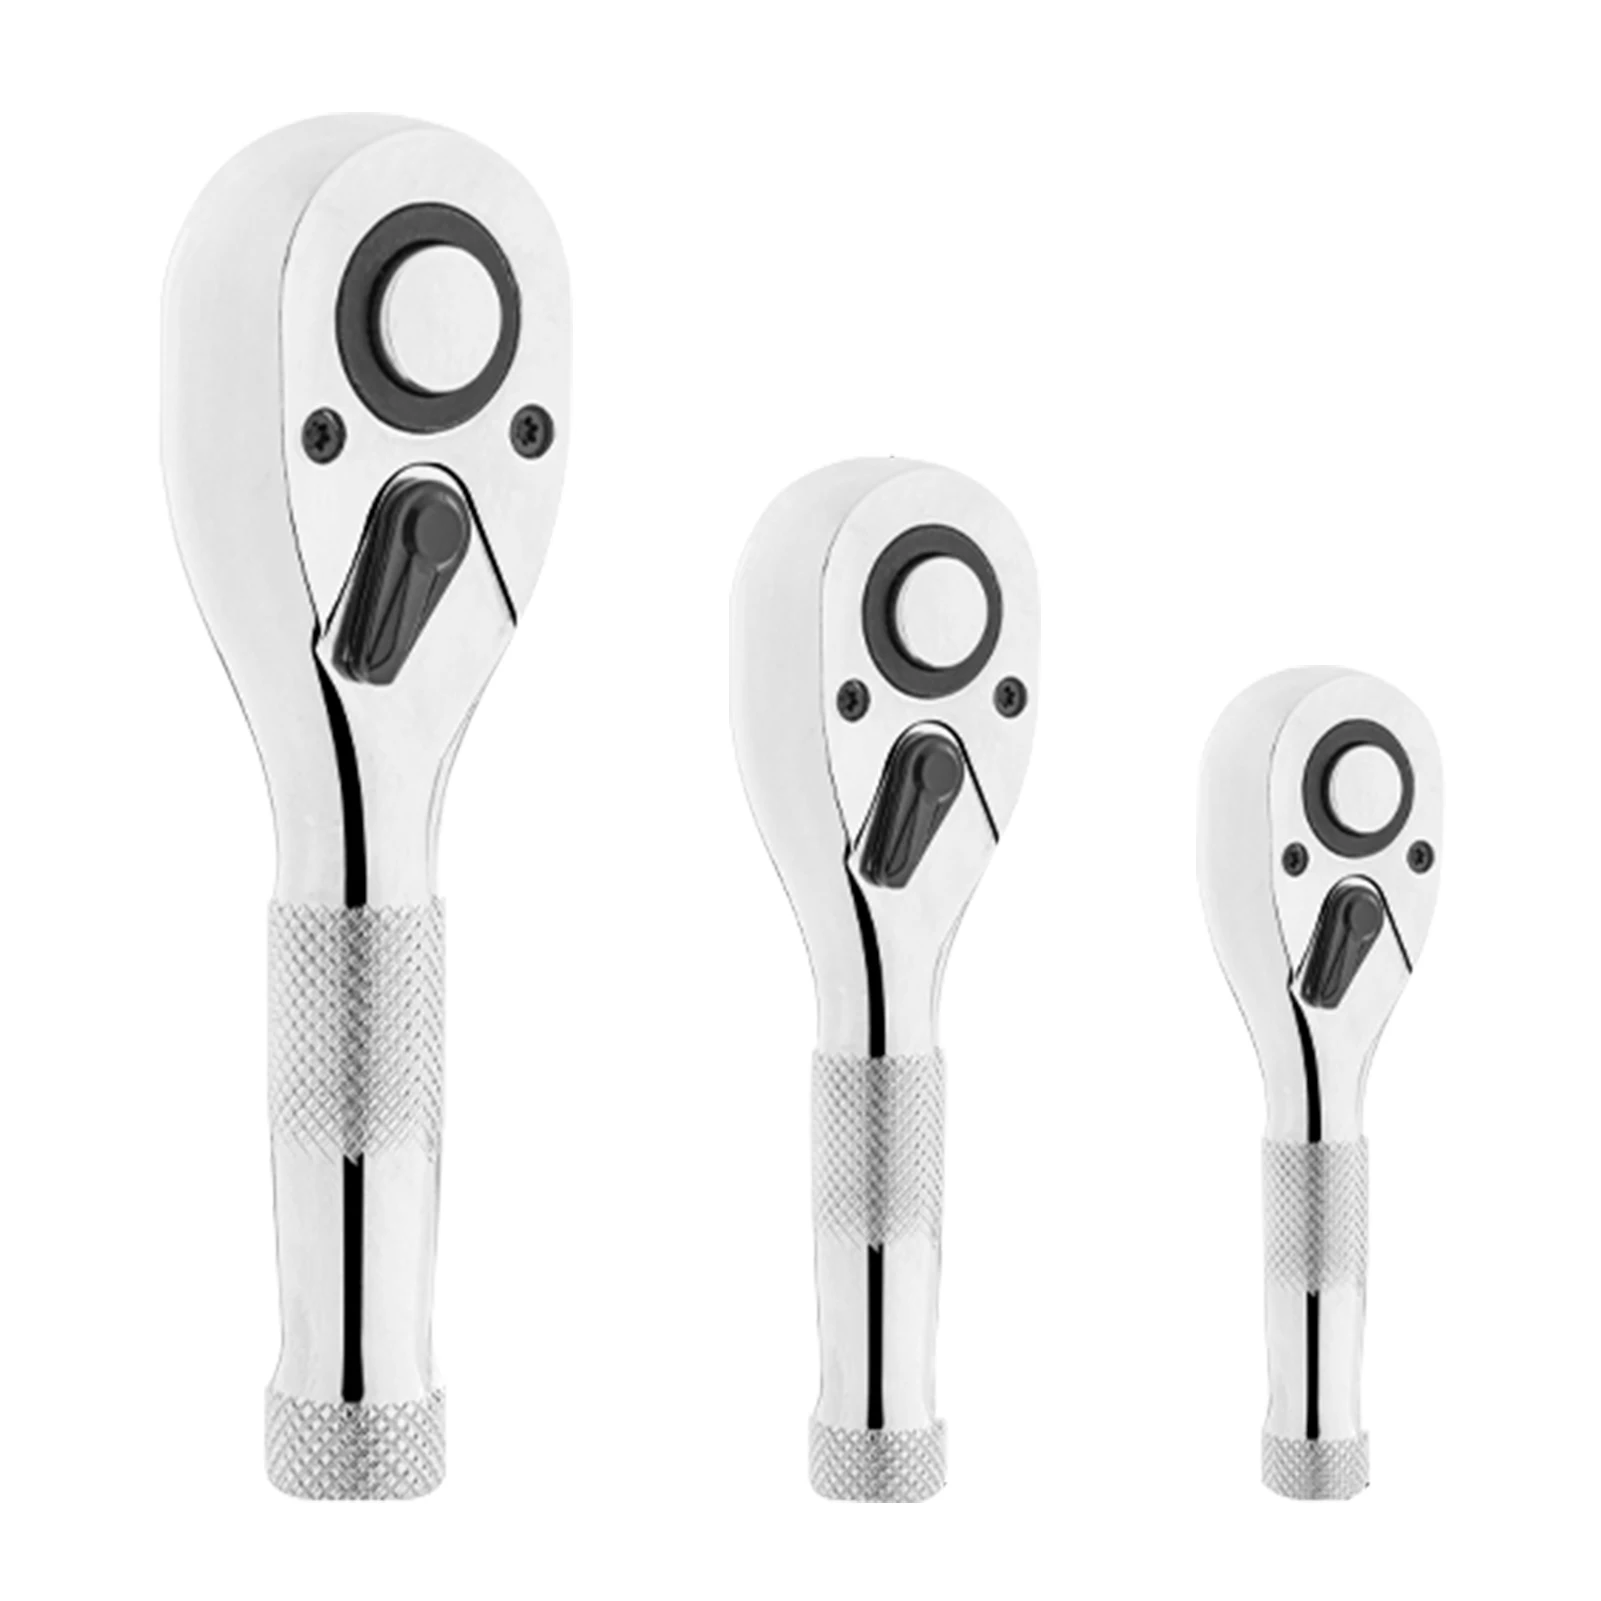 

3pcs Quick-Release Head Reversible Chrome Vanadium Steel 1/4inch 3/8inch 1/2inch Drive Ratchet Wrench Portable 72 Tooth Durable